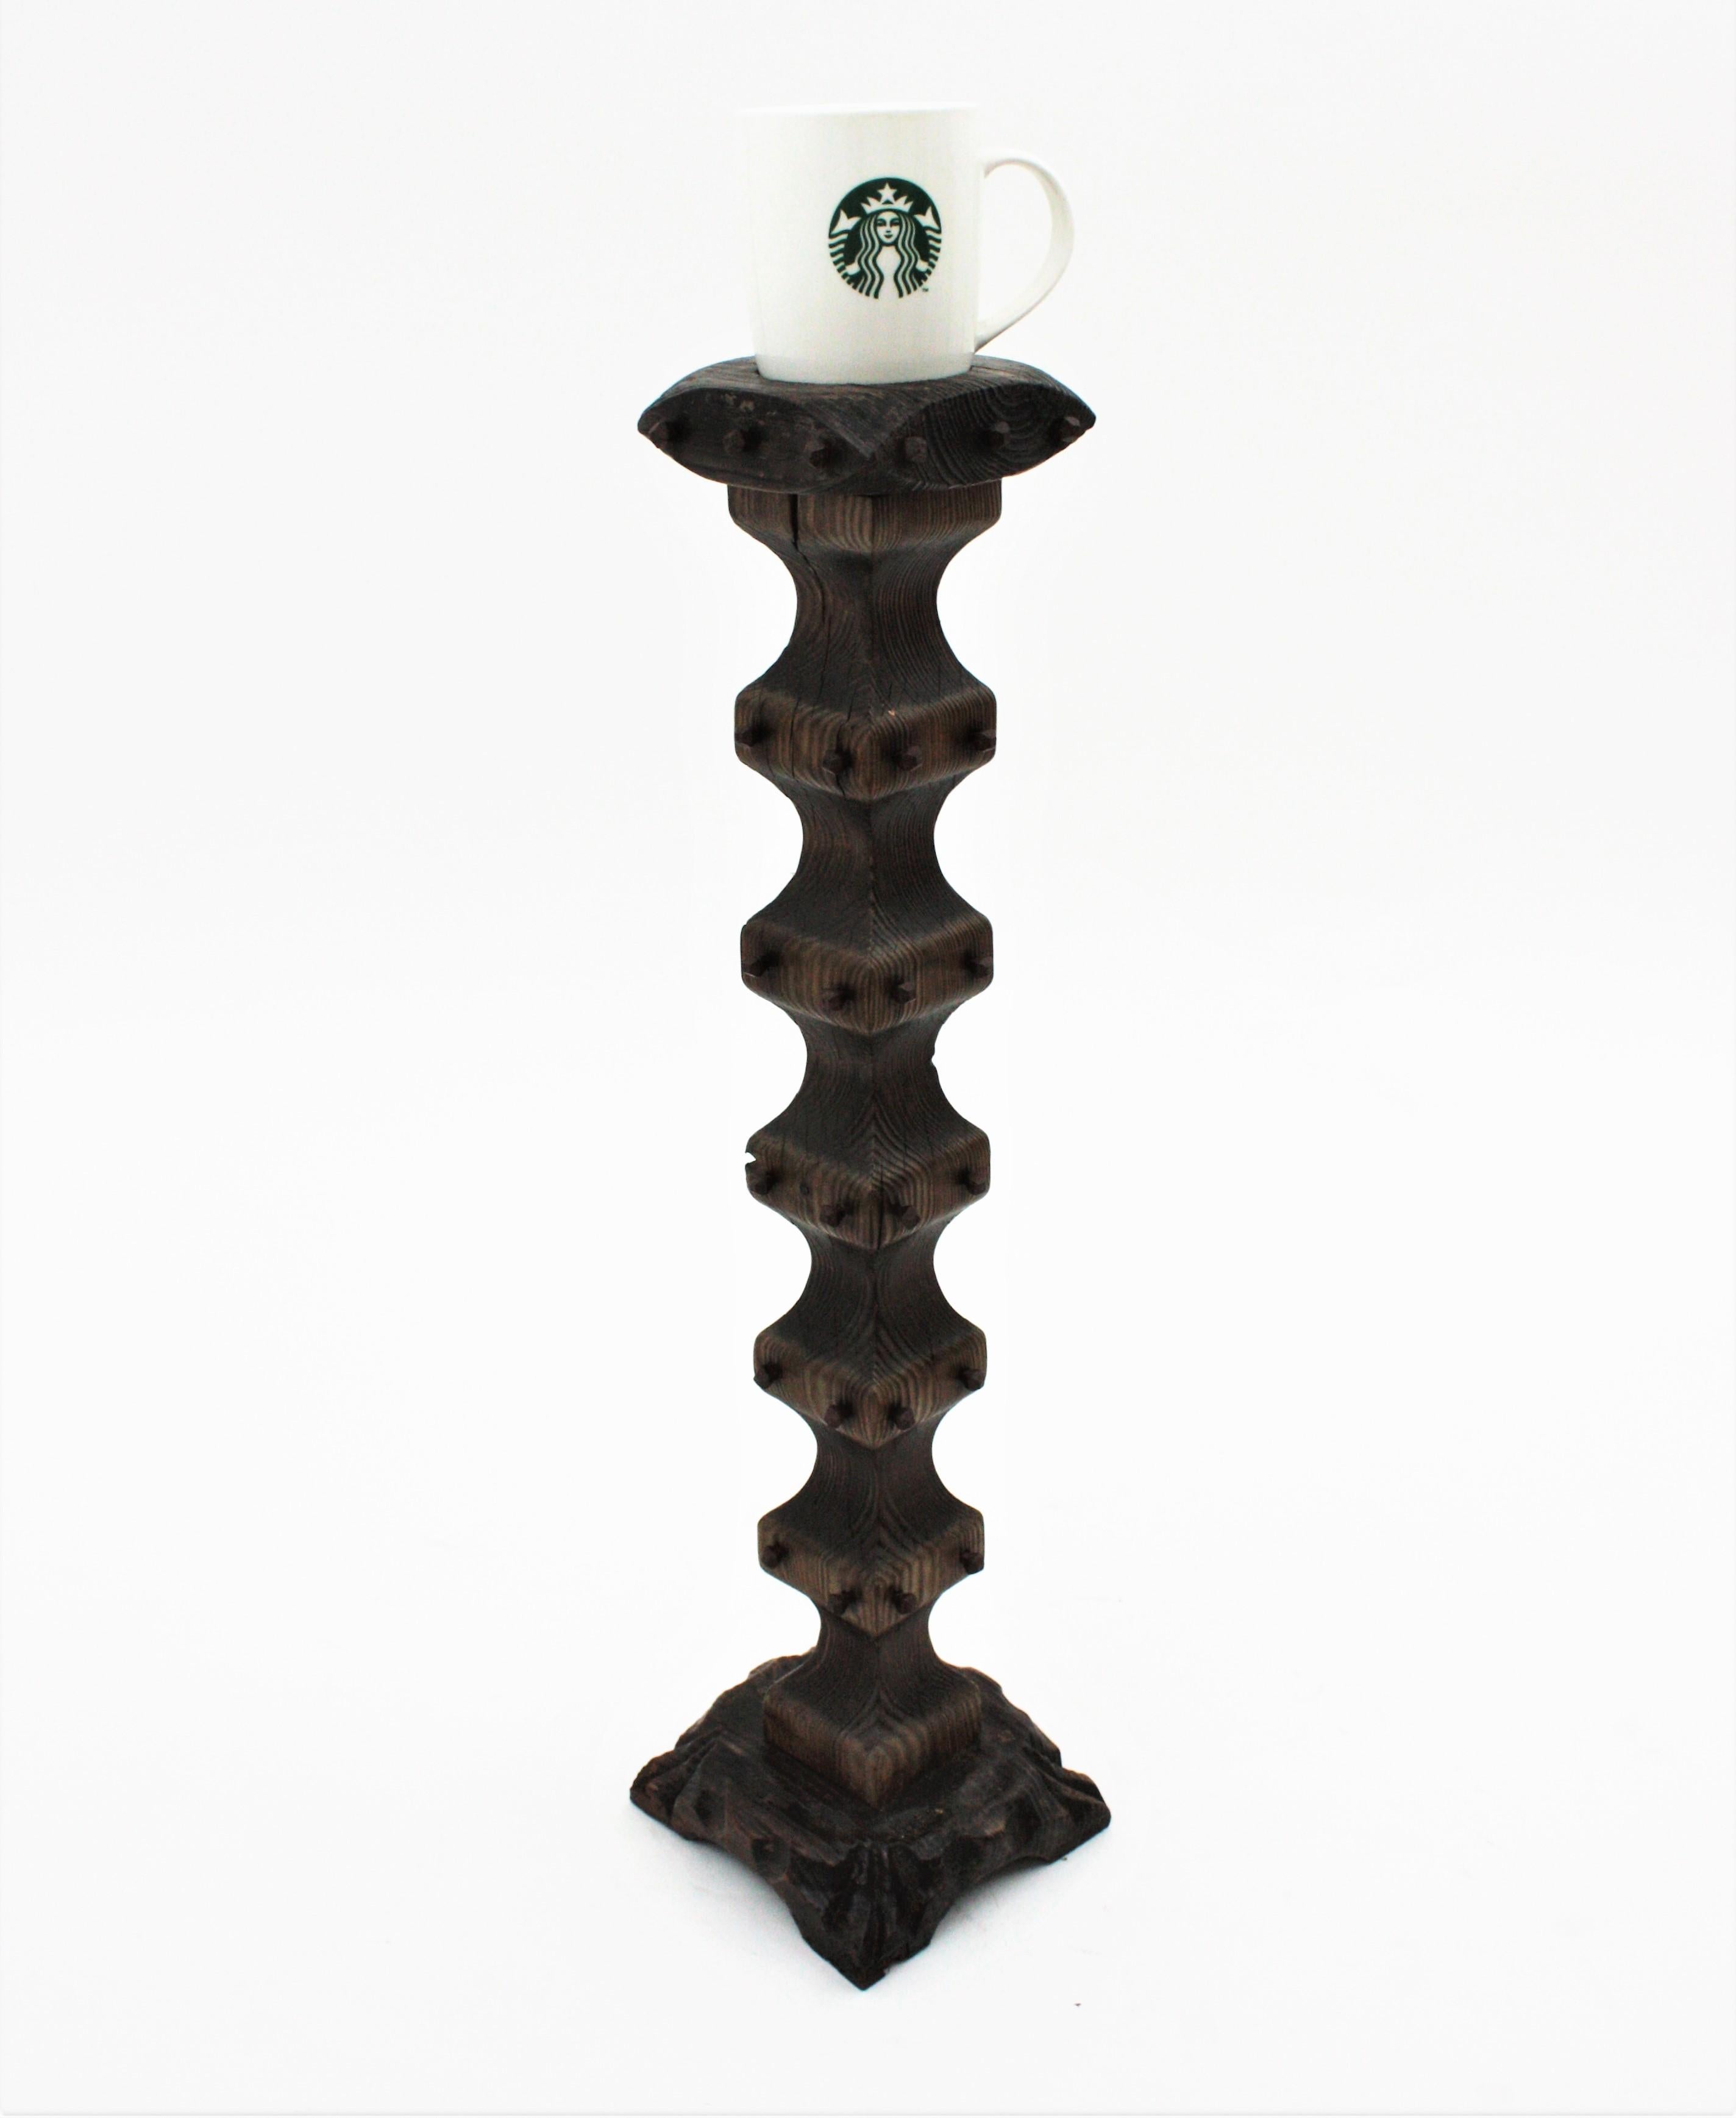 Spanish Revival Carved Wood Torchere Floor Candle Holder with Nail Detail For Sale 3